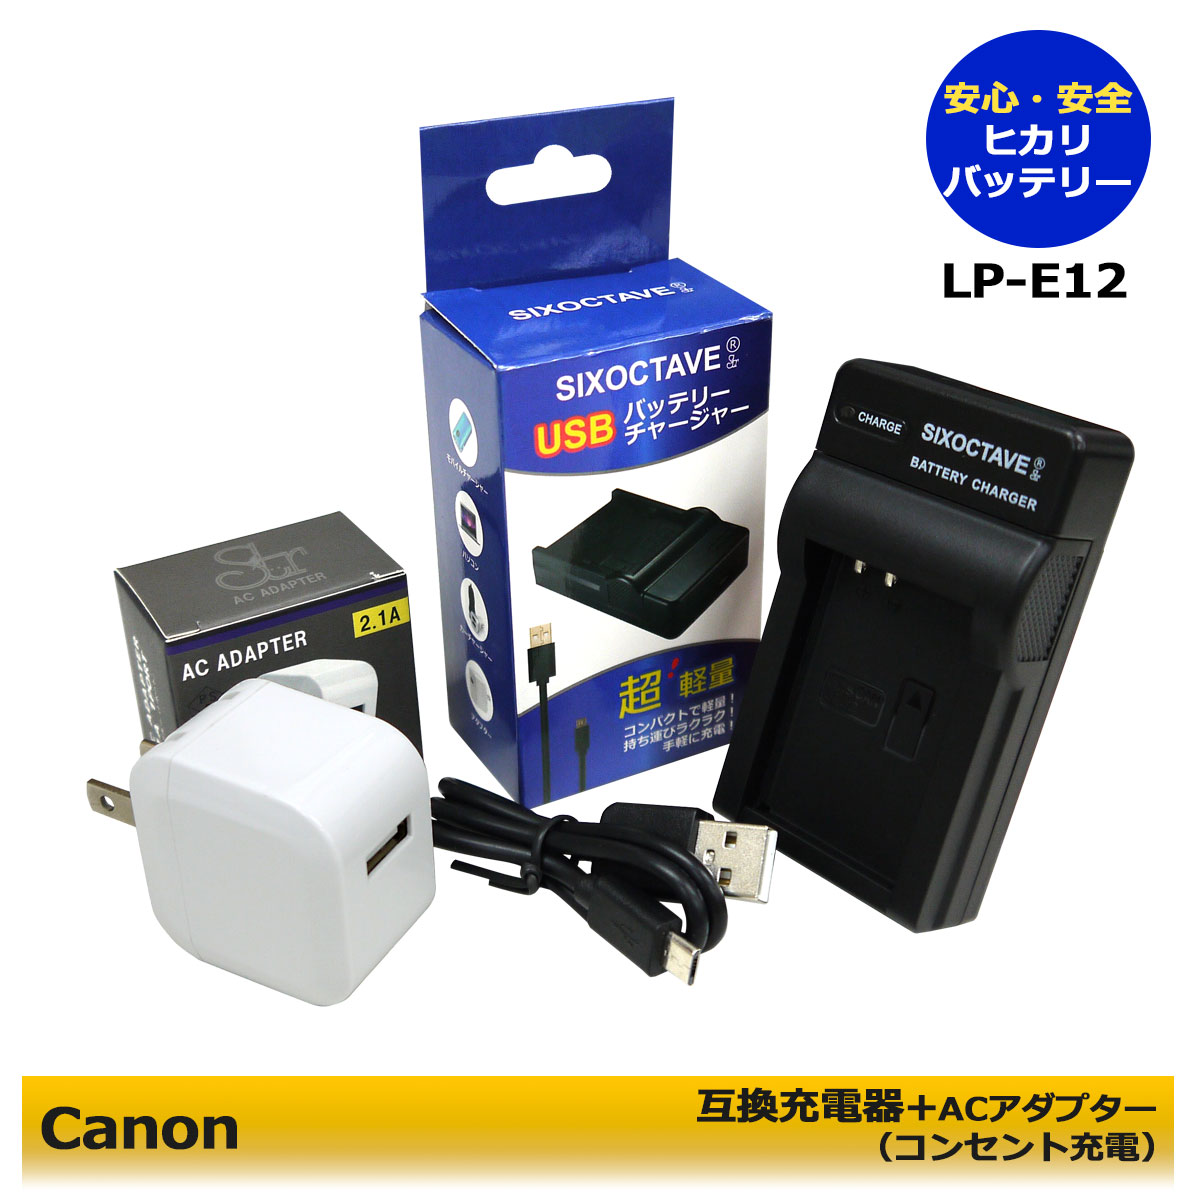 LP-E12 【コンセント充電可能】CANON 